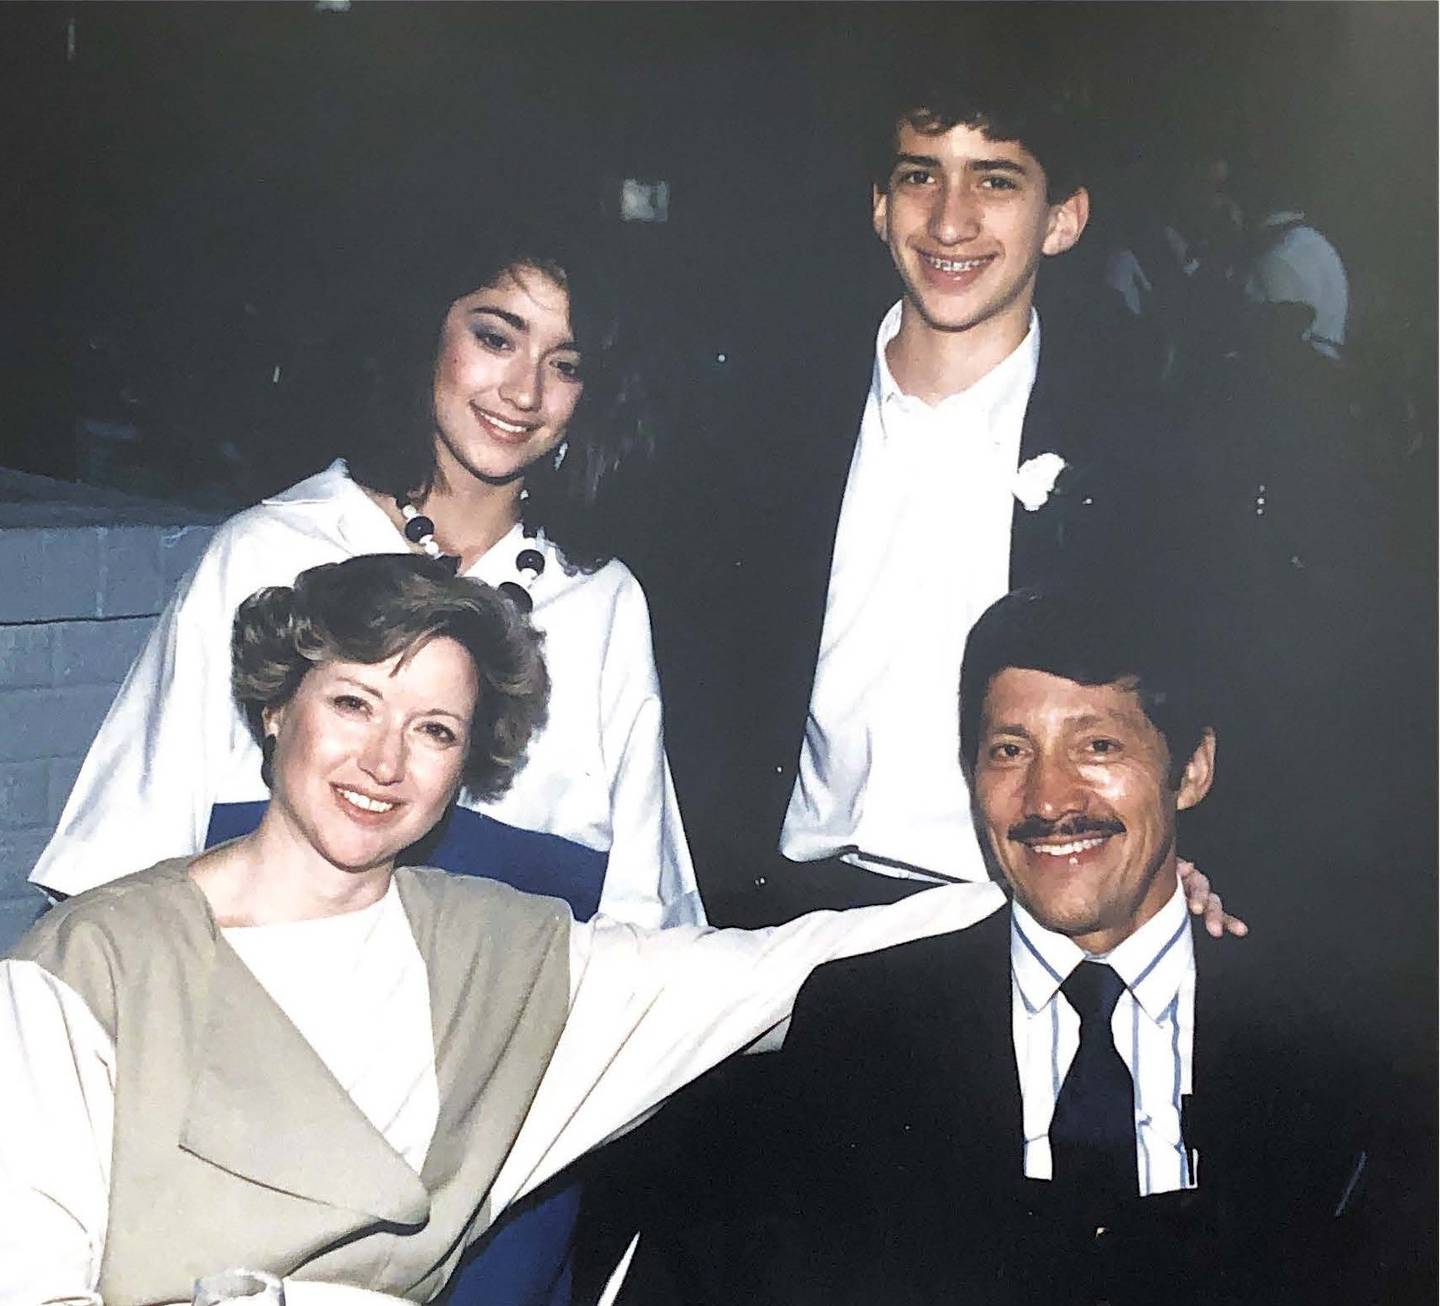 Robert “Bob” Gutierrez, formerly of Joliet and Shorewood and later Orland Park, was known for his faith, frugality, wit, kindness and strength. He is pictured with his wife Barbara Jean and his children Elena Byrne and David Gutierrez.